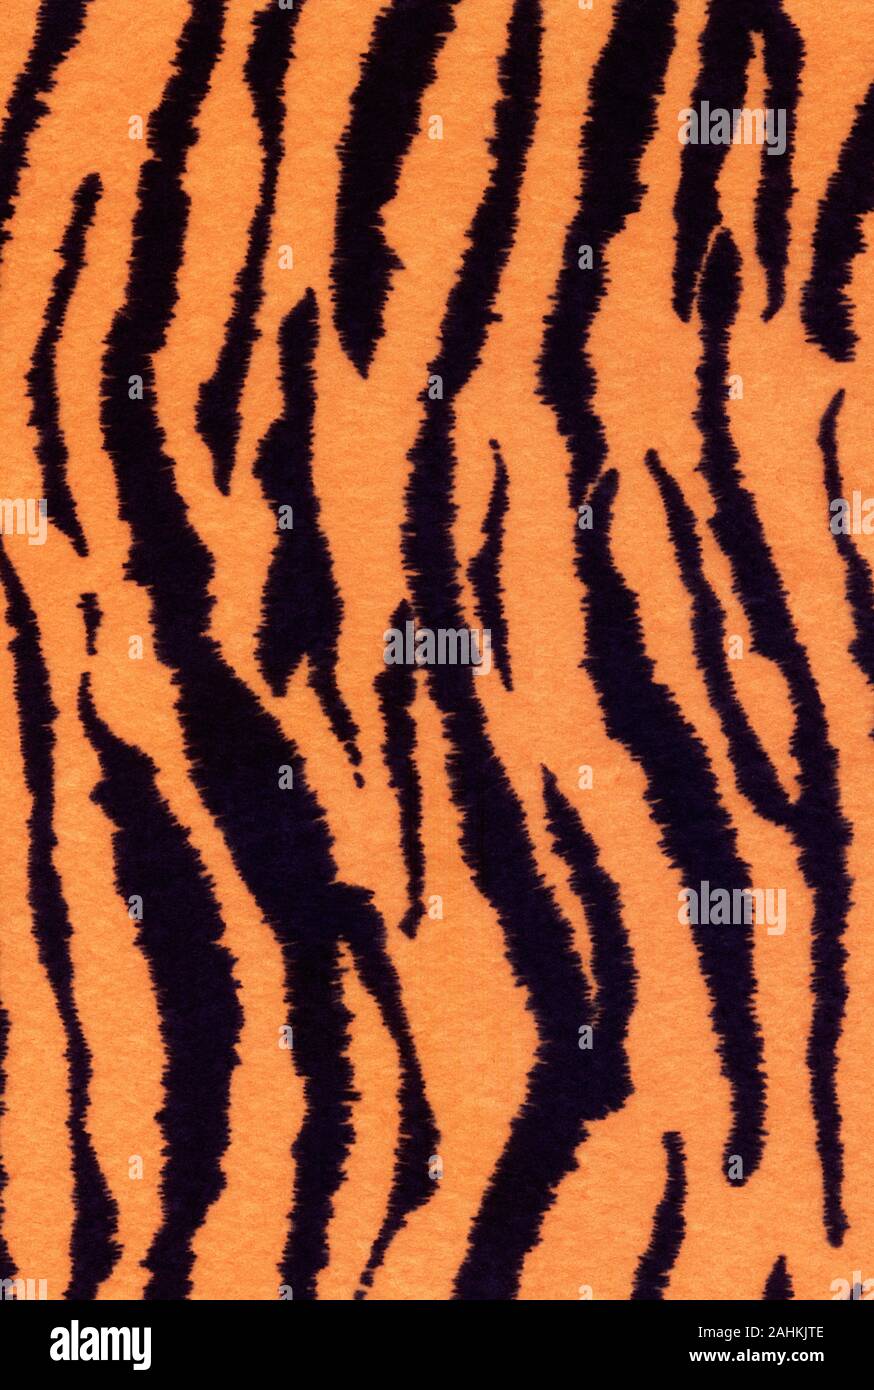 Orange and black striped animal print background. This is a high resolution scan of a piece of fabric showing all the detail. Stock Photo